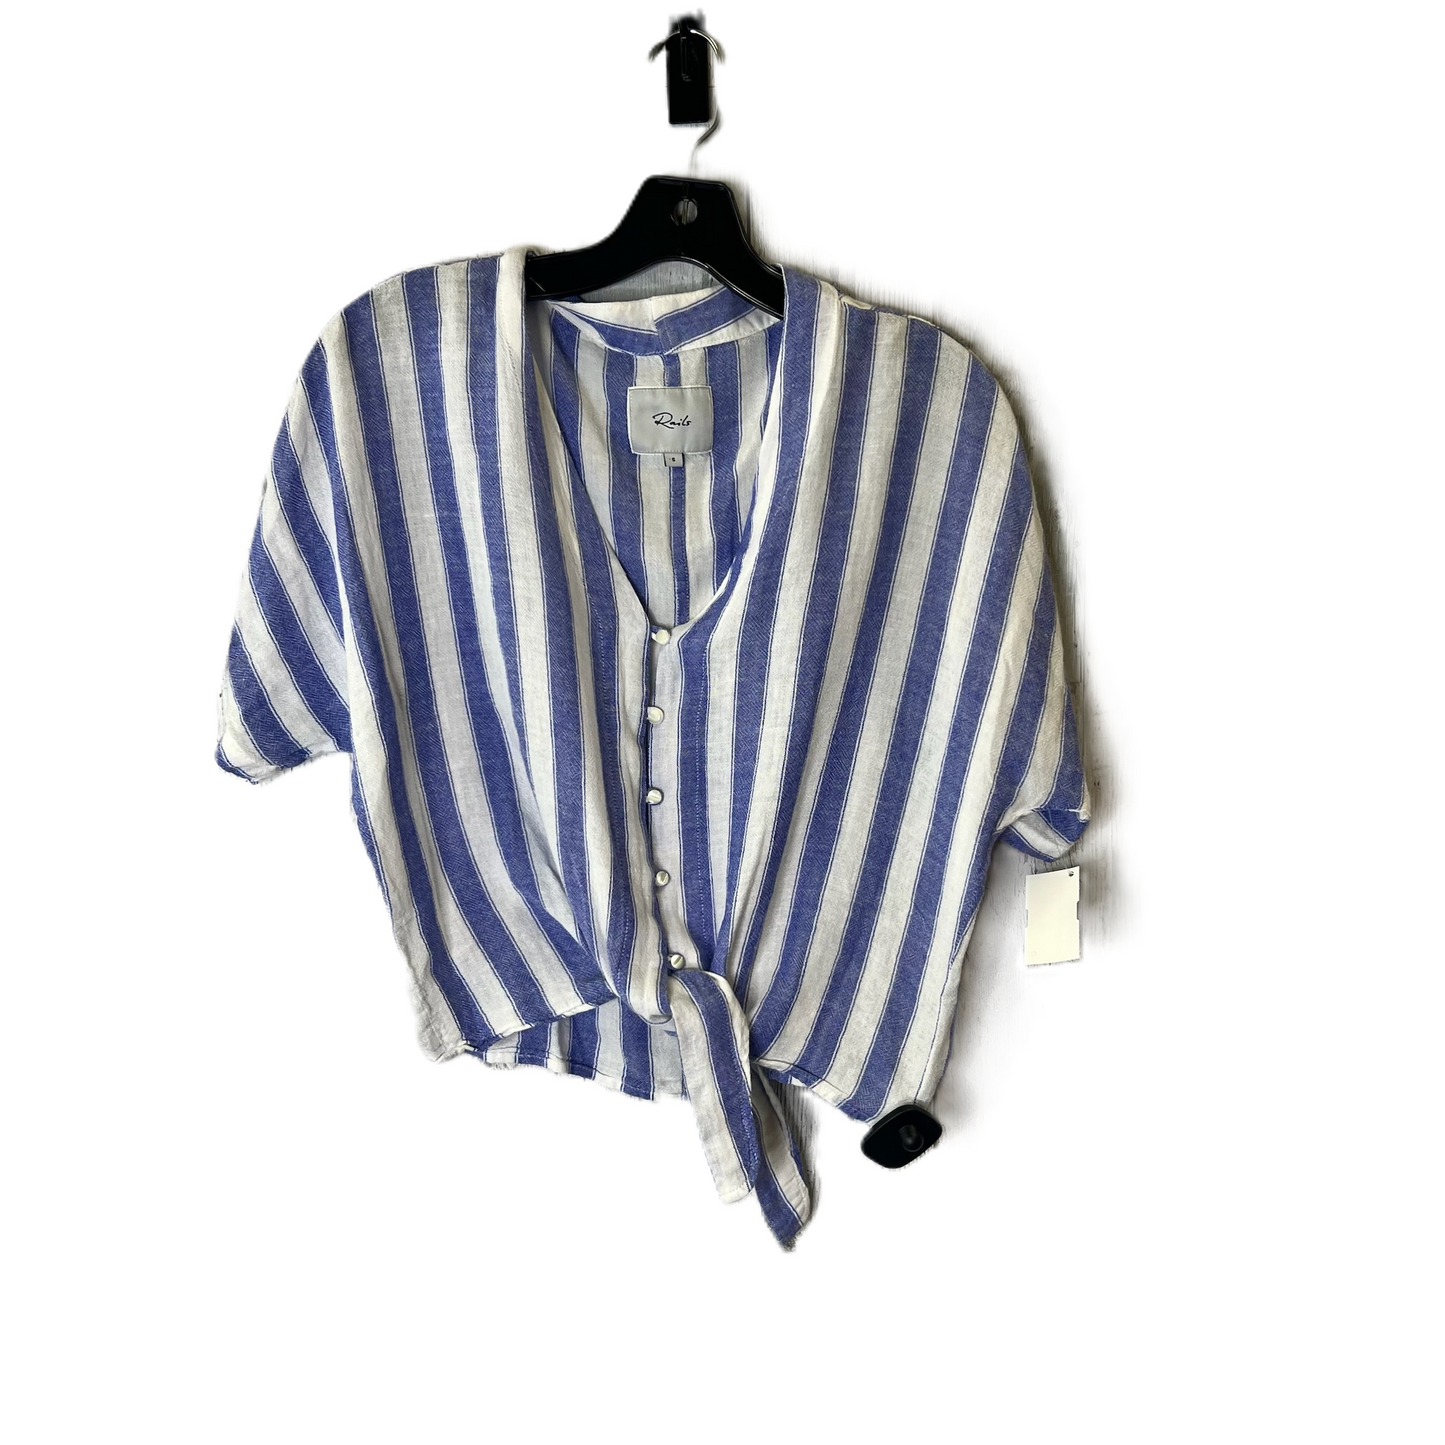 Striped Pattern Top Short Sleeve By Rails, Size: S